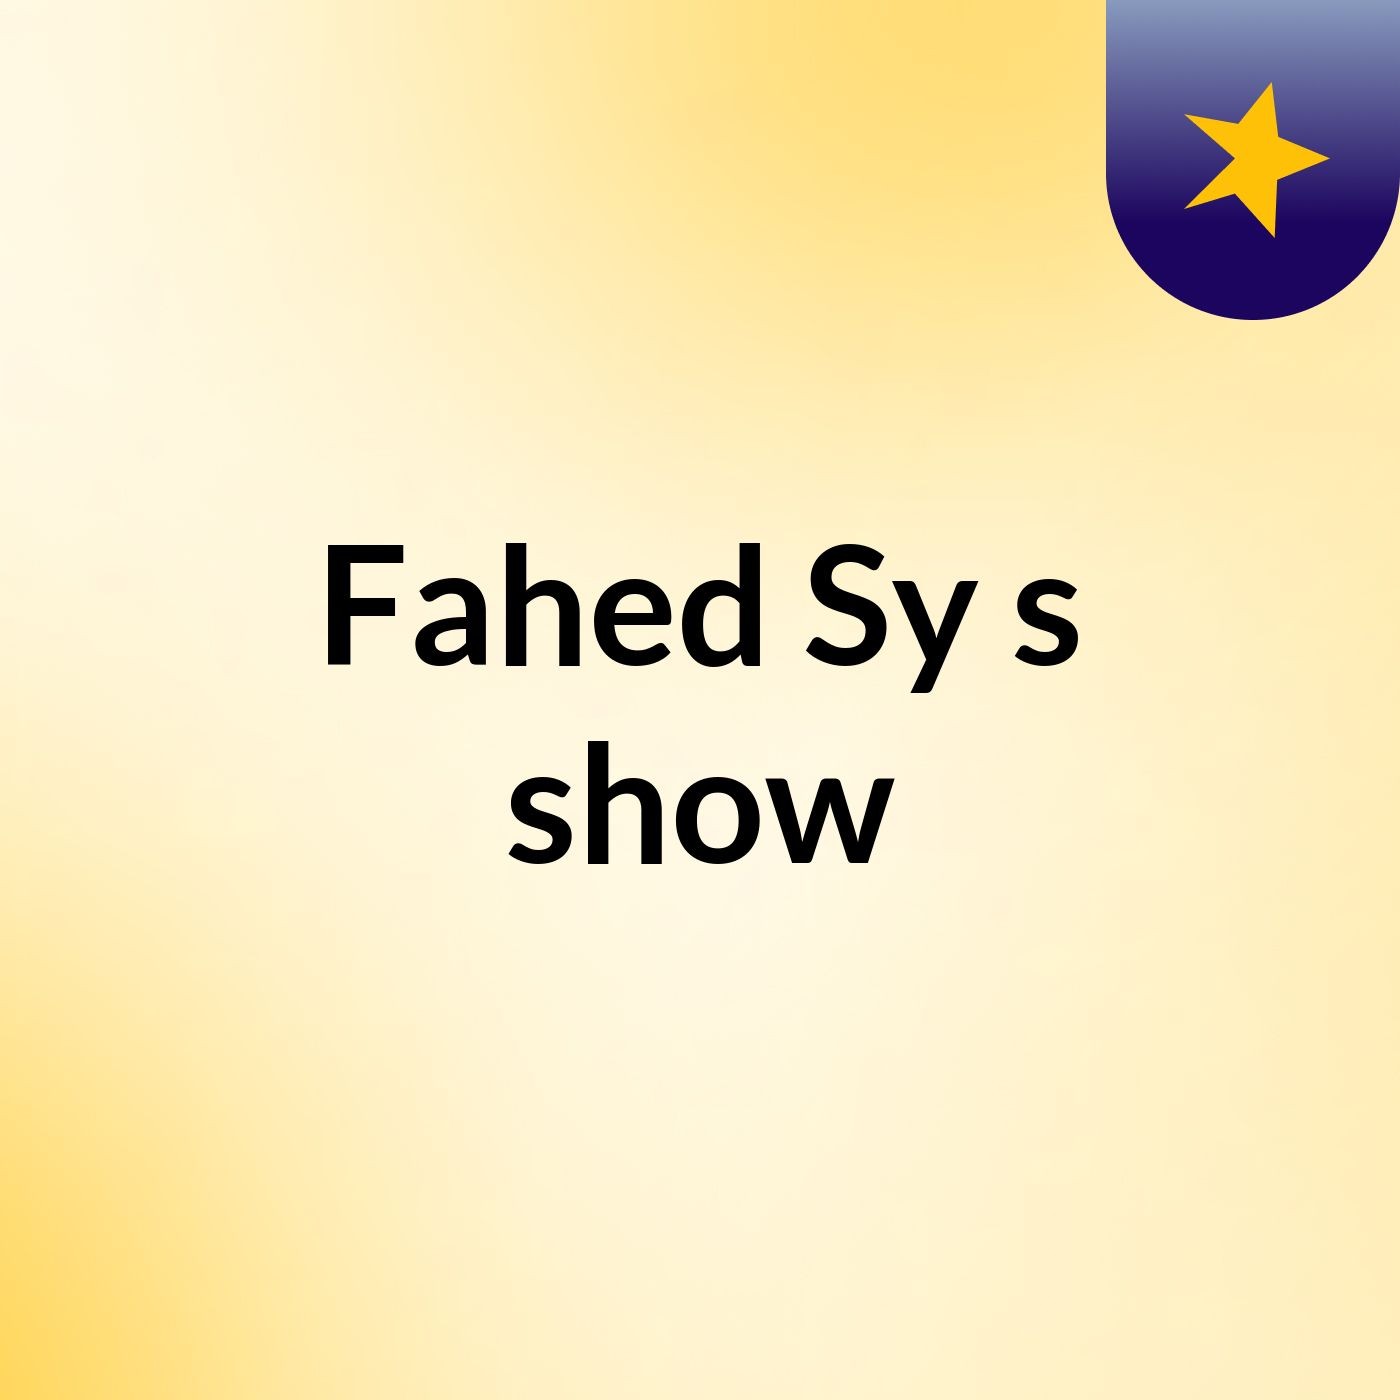 Fahed Sy's show